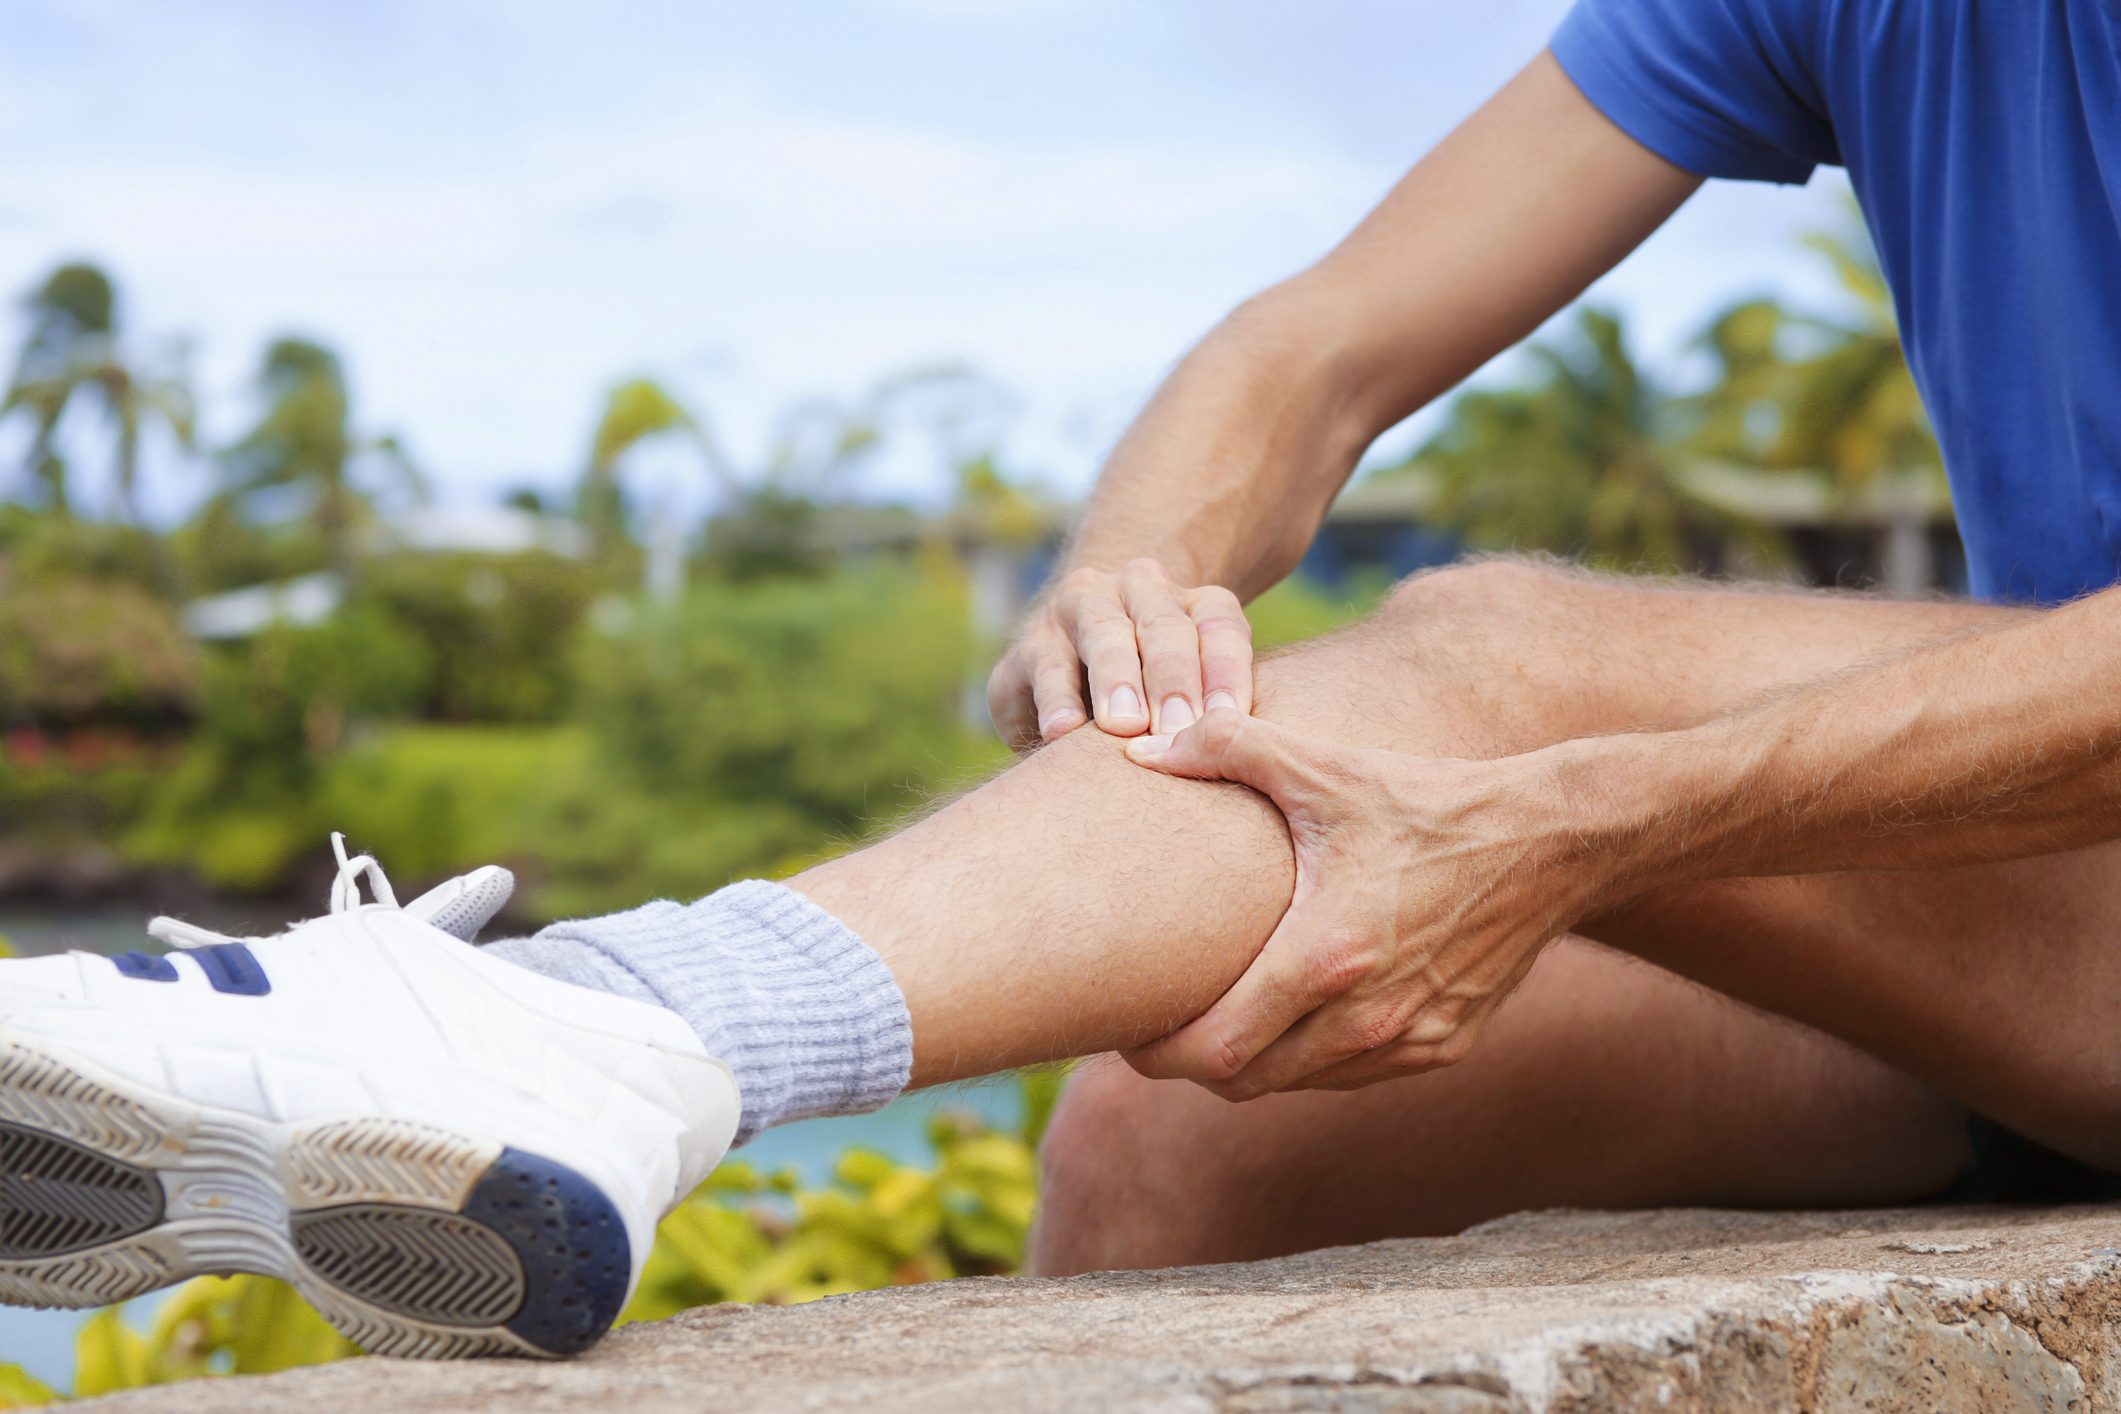 Shin Splints: Why They Happen and How to Avoid Them